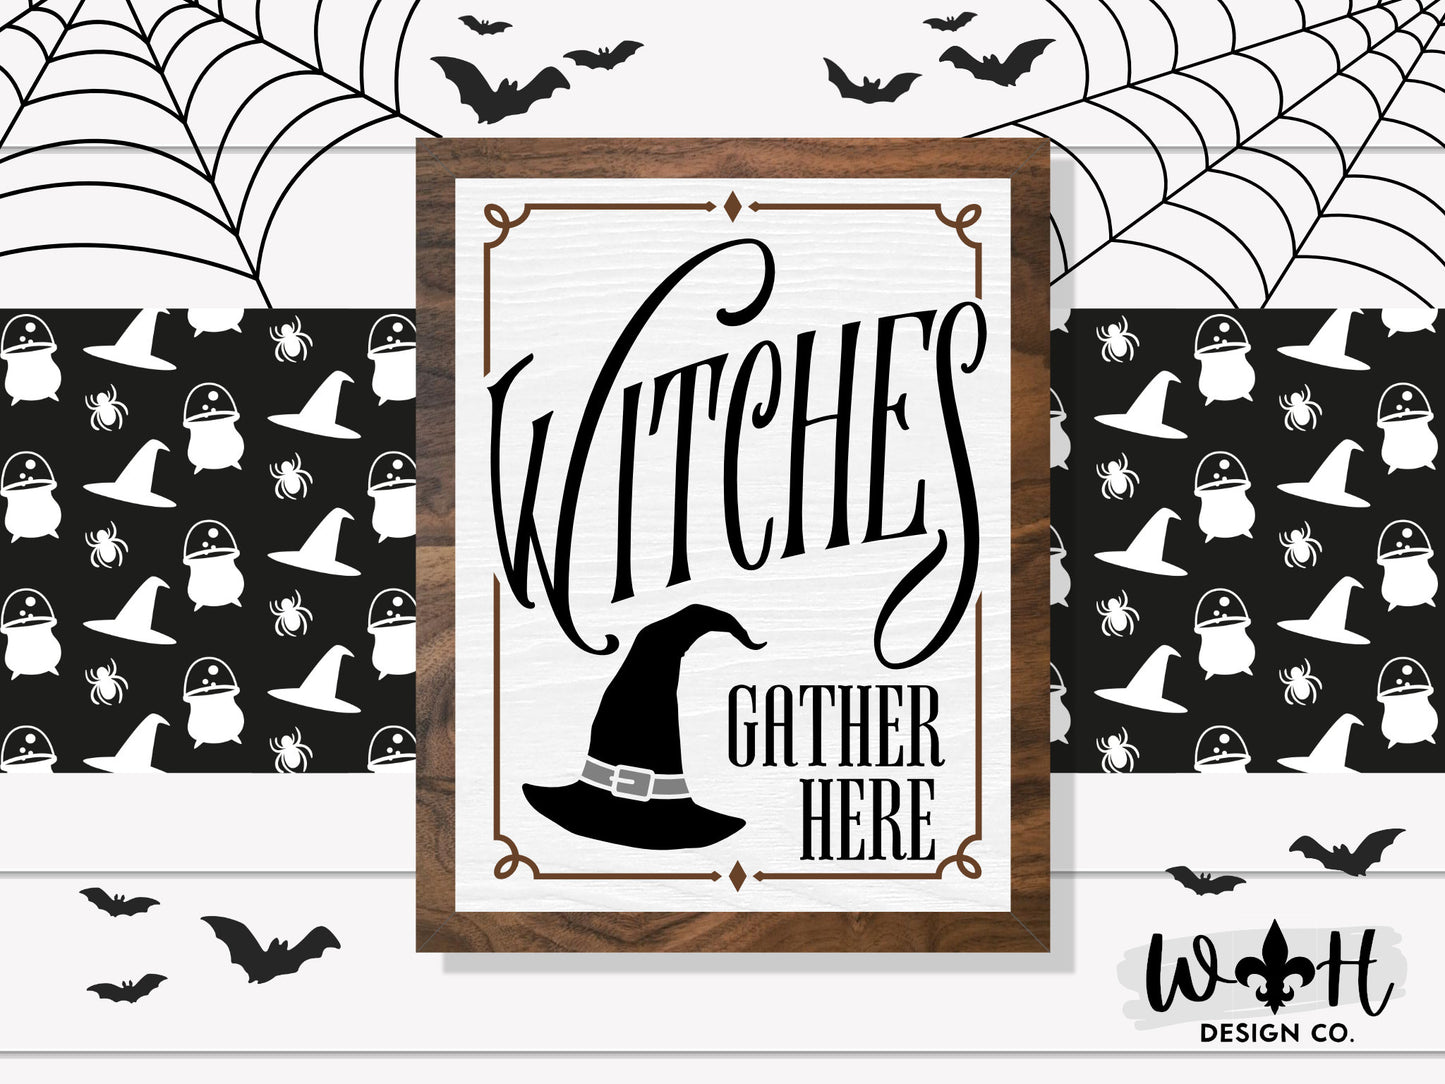 Witches Gather Here - Witchy Wall Sign - Halloween Coffee Bar Sign - Dark Academia Mantel Decor - Cottagecore Home Decor - Gothic Wall Art